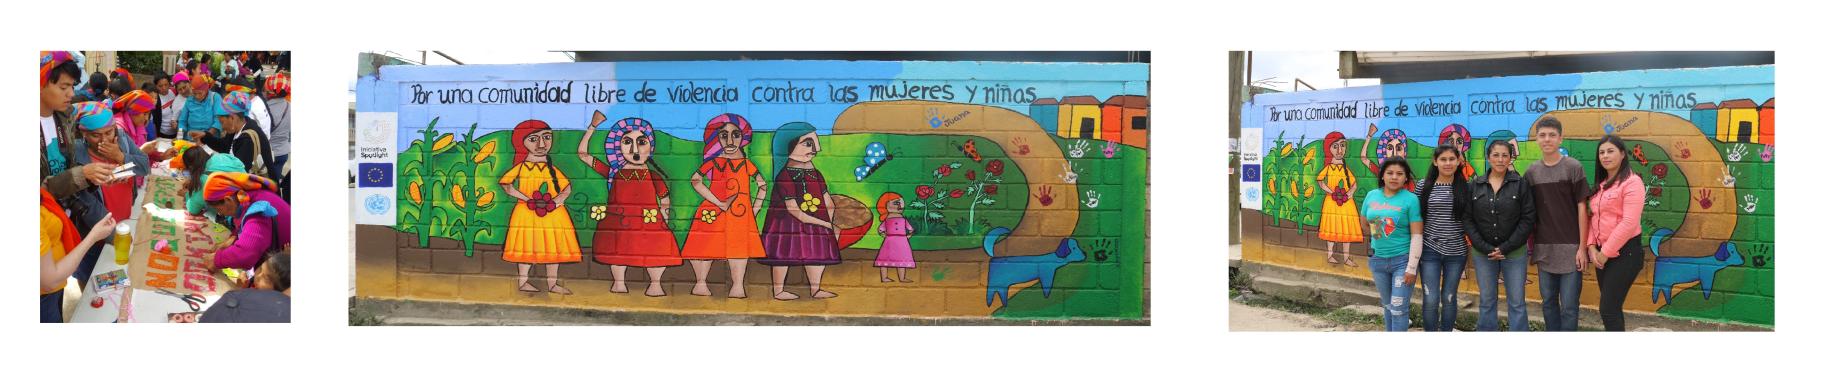 Three tiles of images: the first shows members of the indigenous community painting around a table, the second shows the full mural which displays indigenous women under the headline "For a community free of violence against women and girls;" and the third shows community members standing in front of the painted mural. 